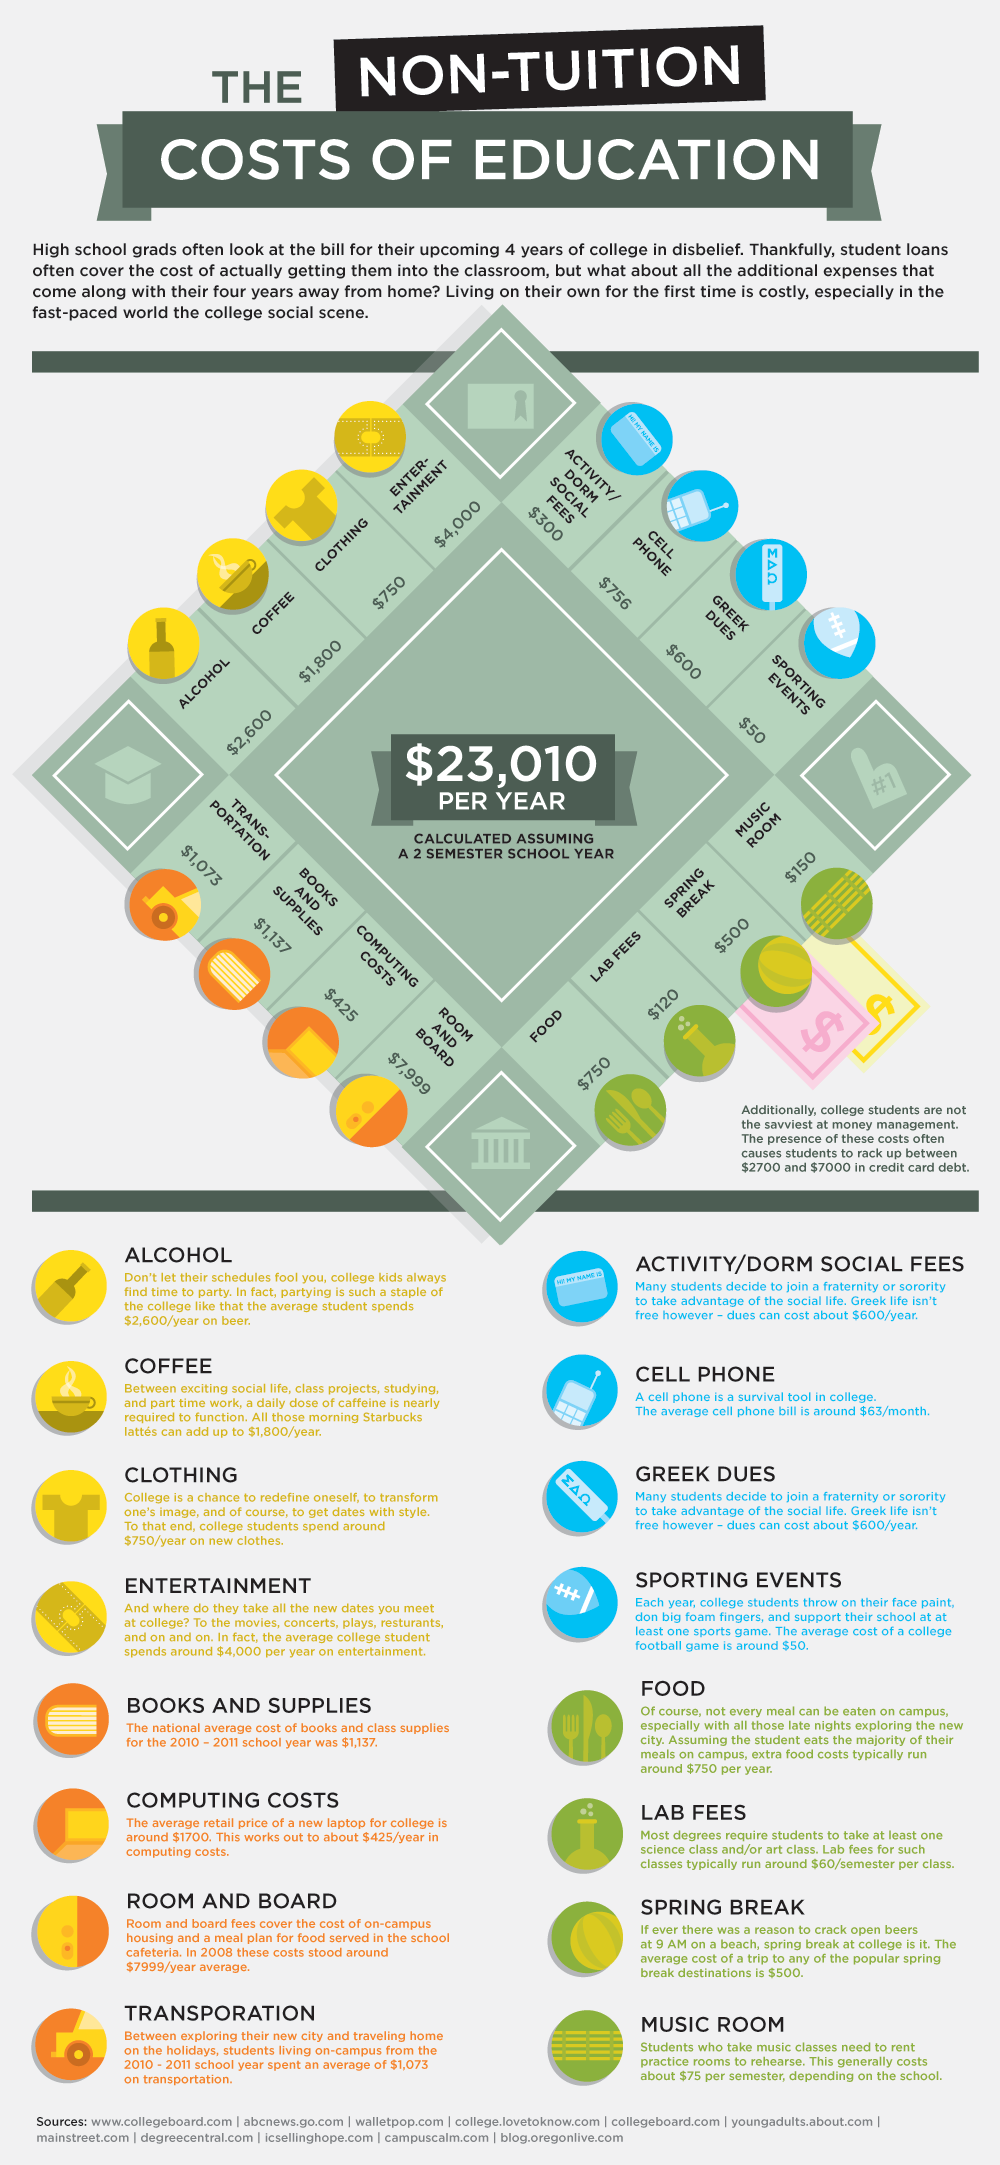 http://blog.socrato.com/wp-content/uploads/2011/03/The-non-tuition-costs-of-college-education-infographic.png